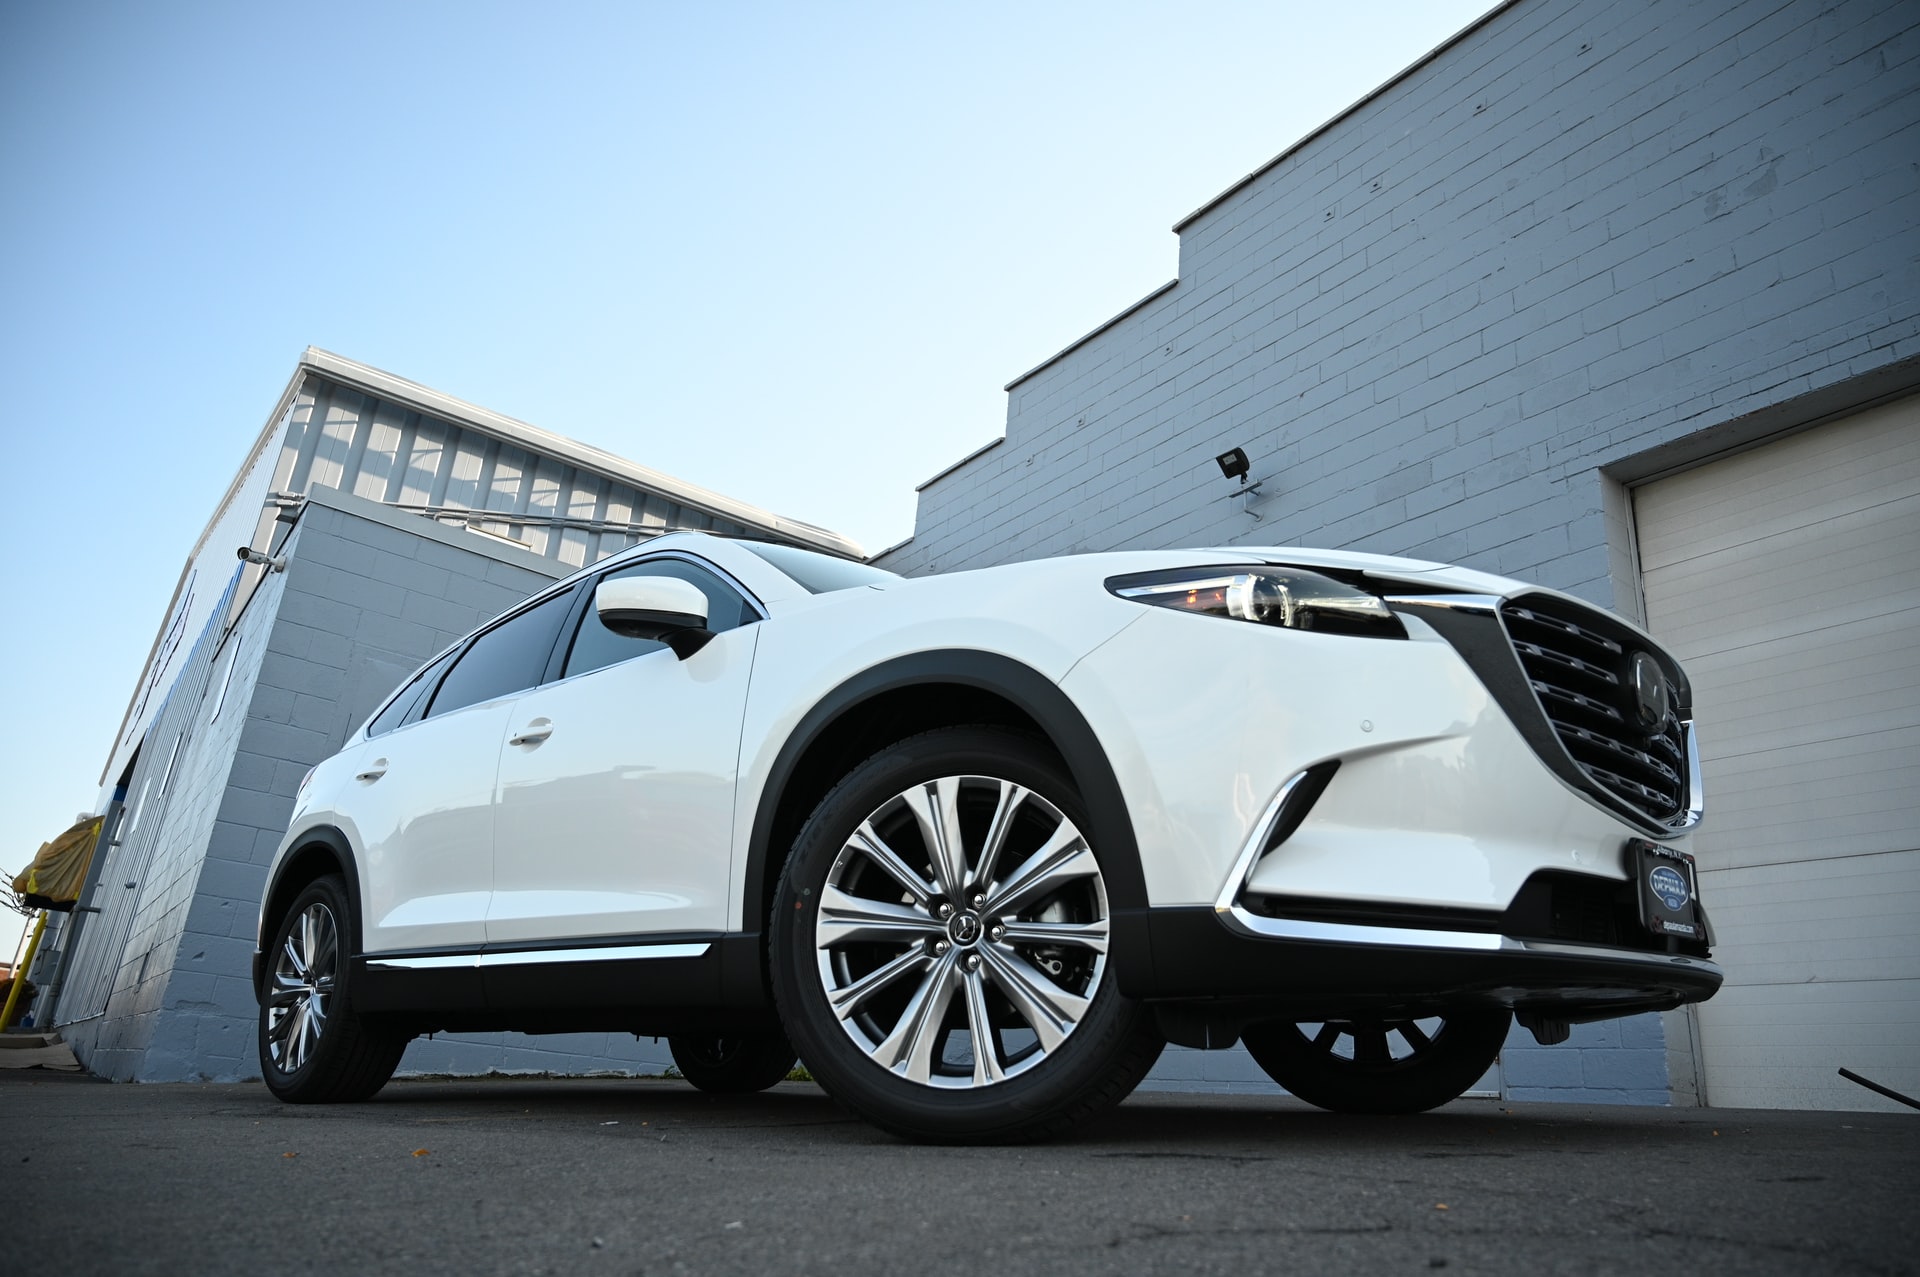 Best-All-Season-Tires-for-Mazda-CX-9